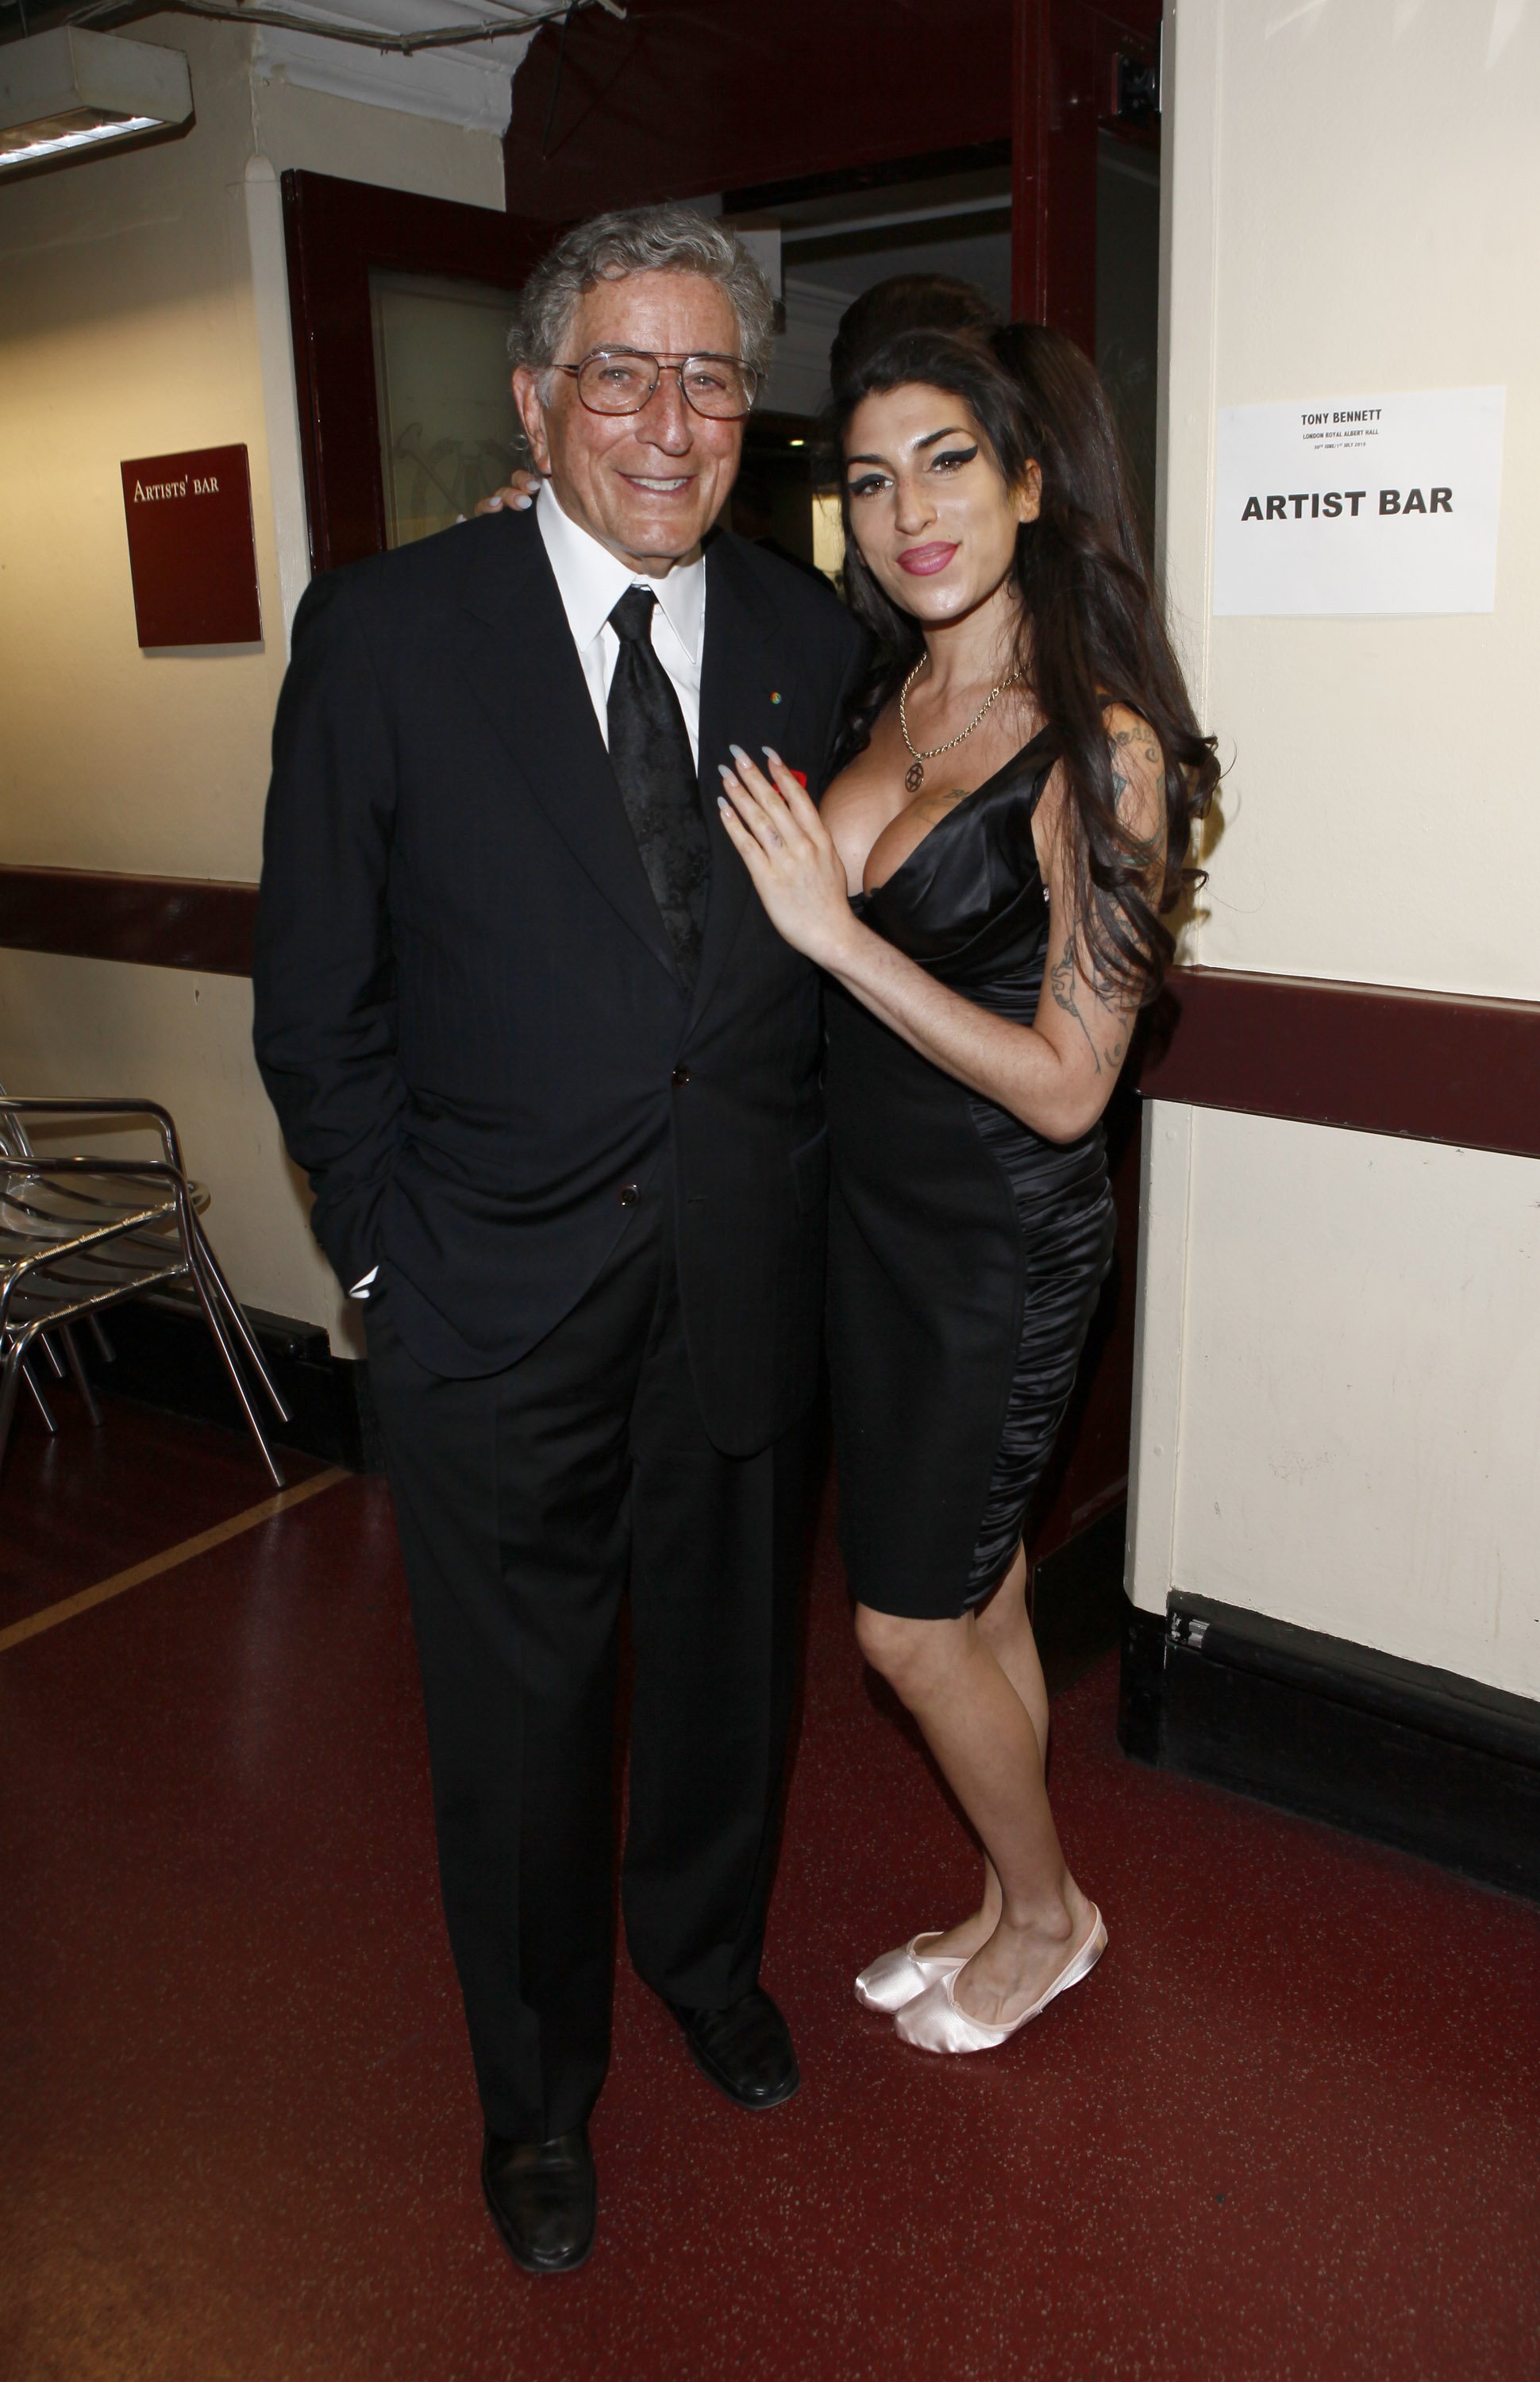 Tony Bennett and Amy Winehouse attend the after show party for Tony Bennett's concert at Royal Albert Hall on July 1, 2010 | Getty Images